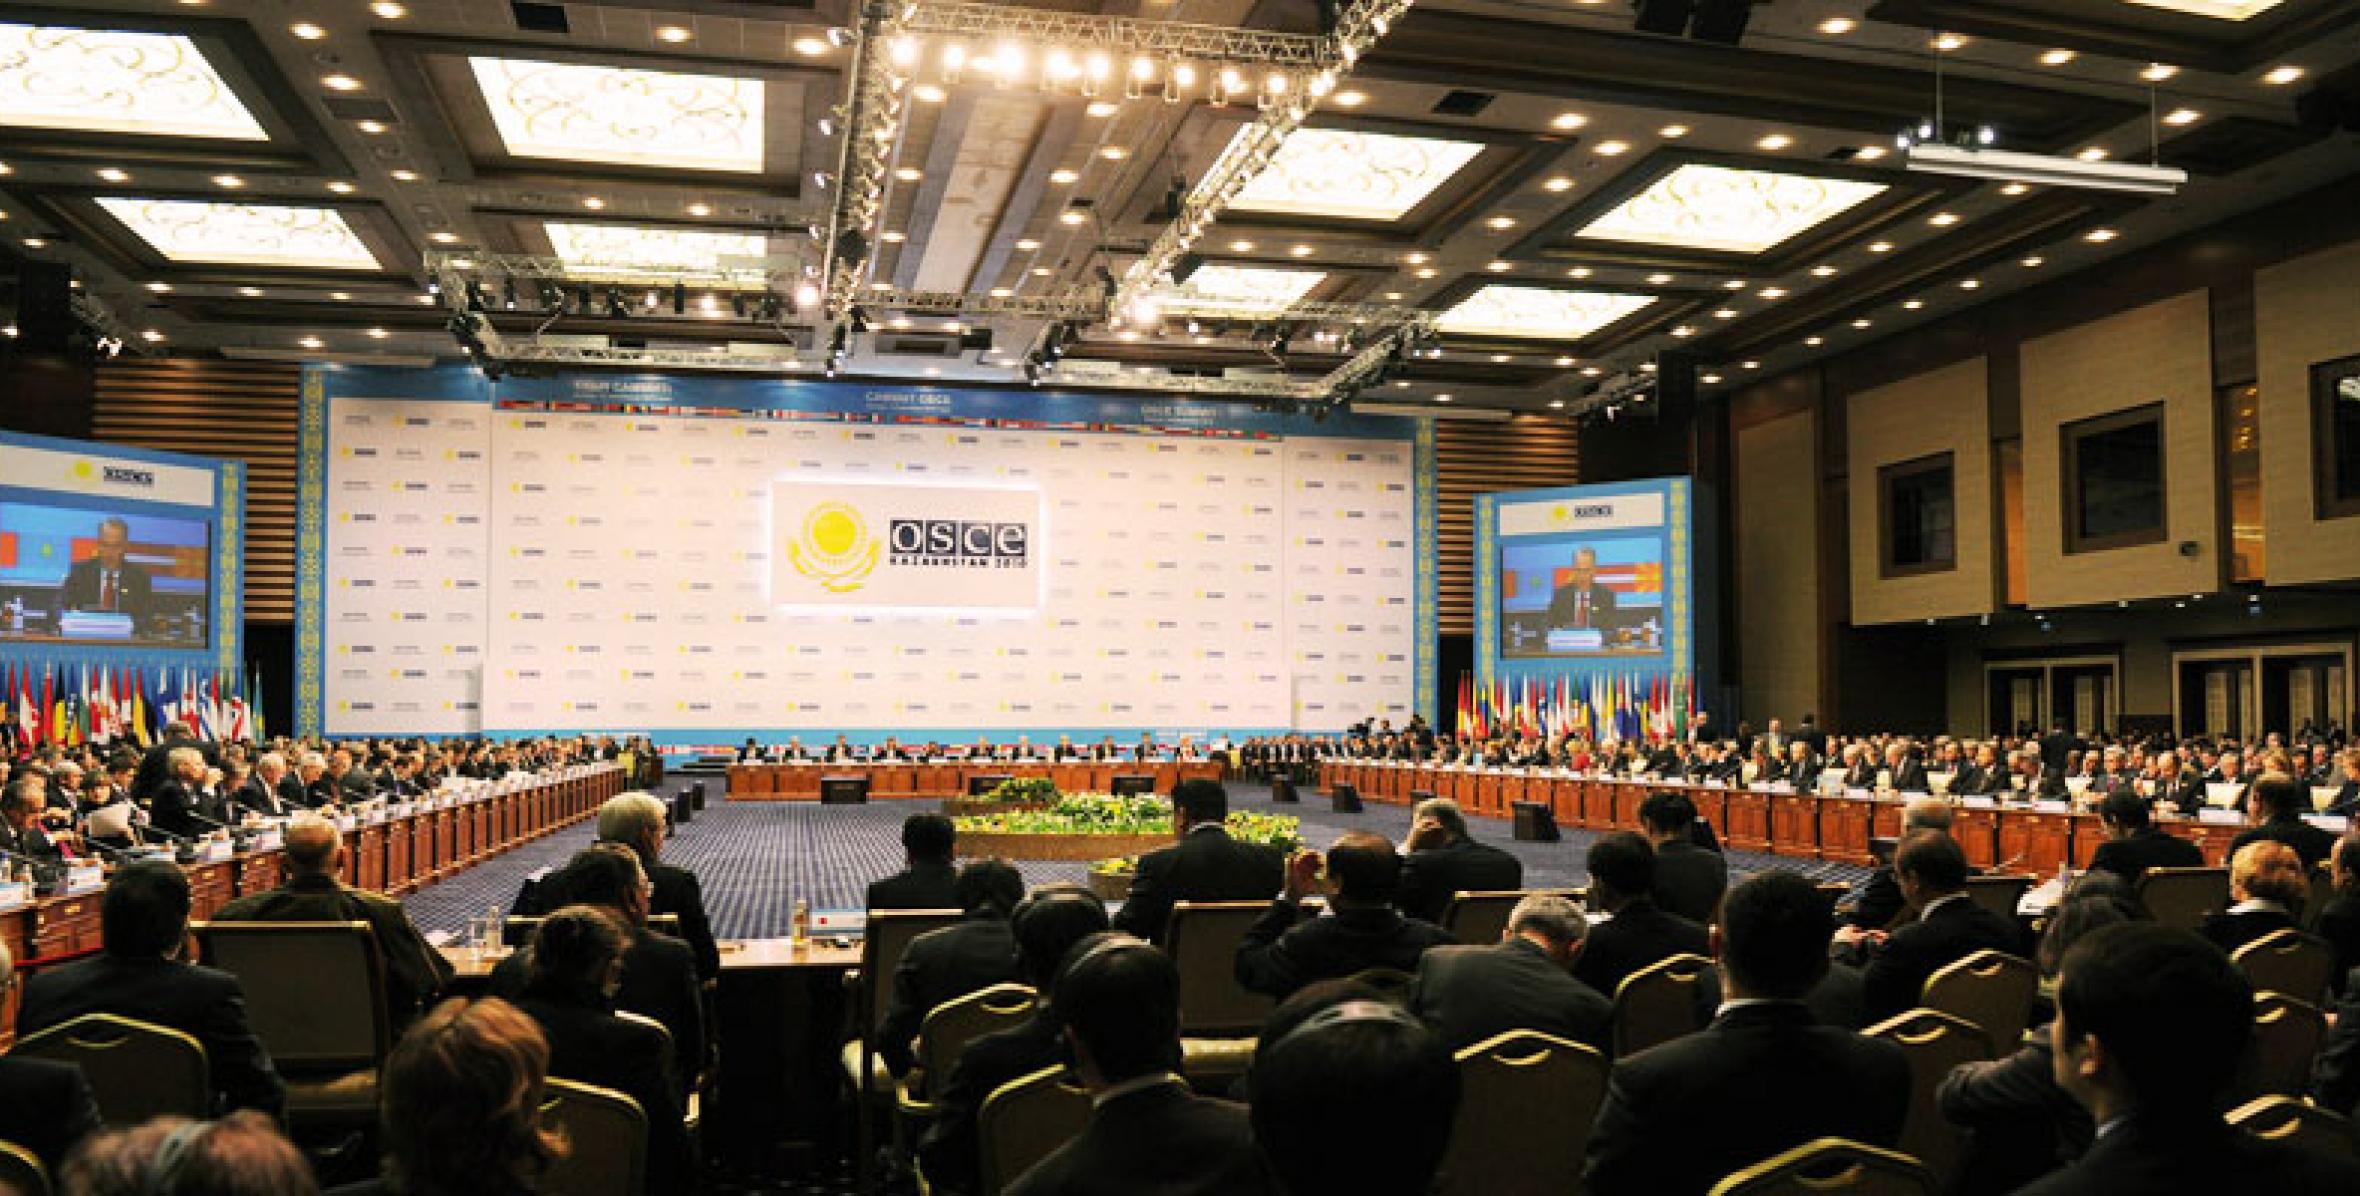 Ilham Aliyev attended the 7th Summit of the OSCE in Astana